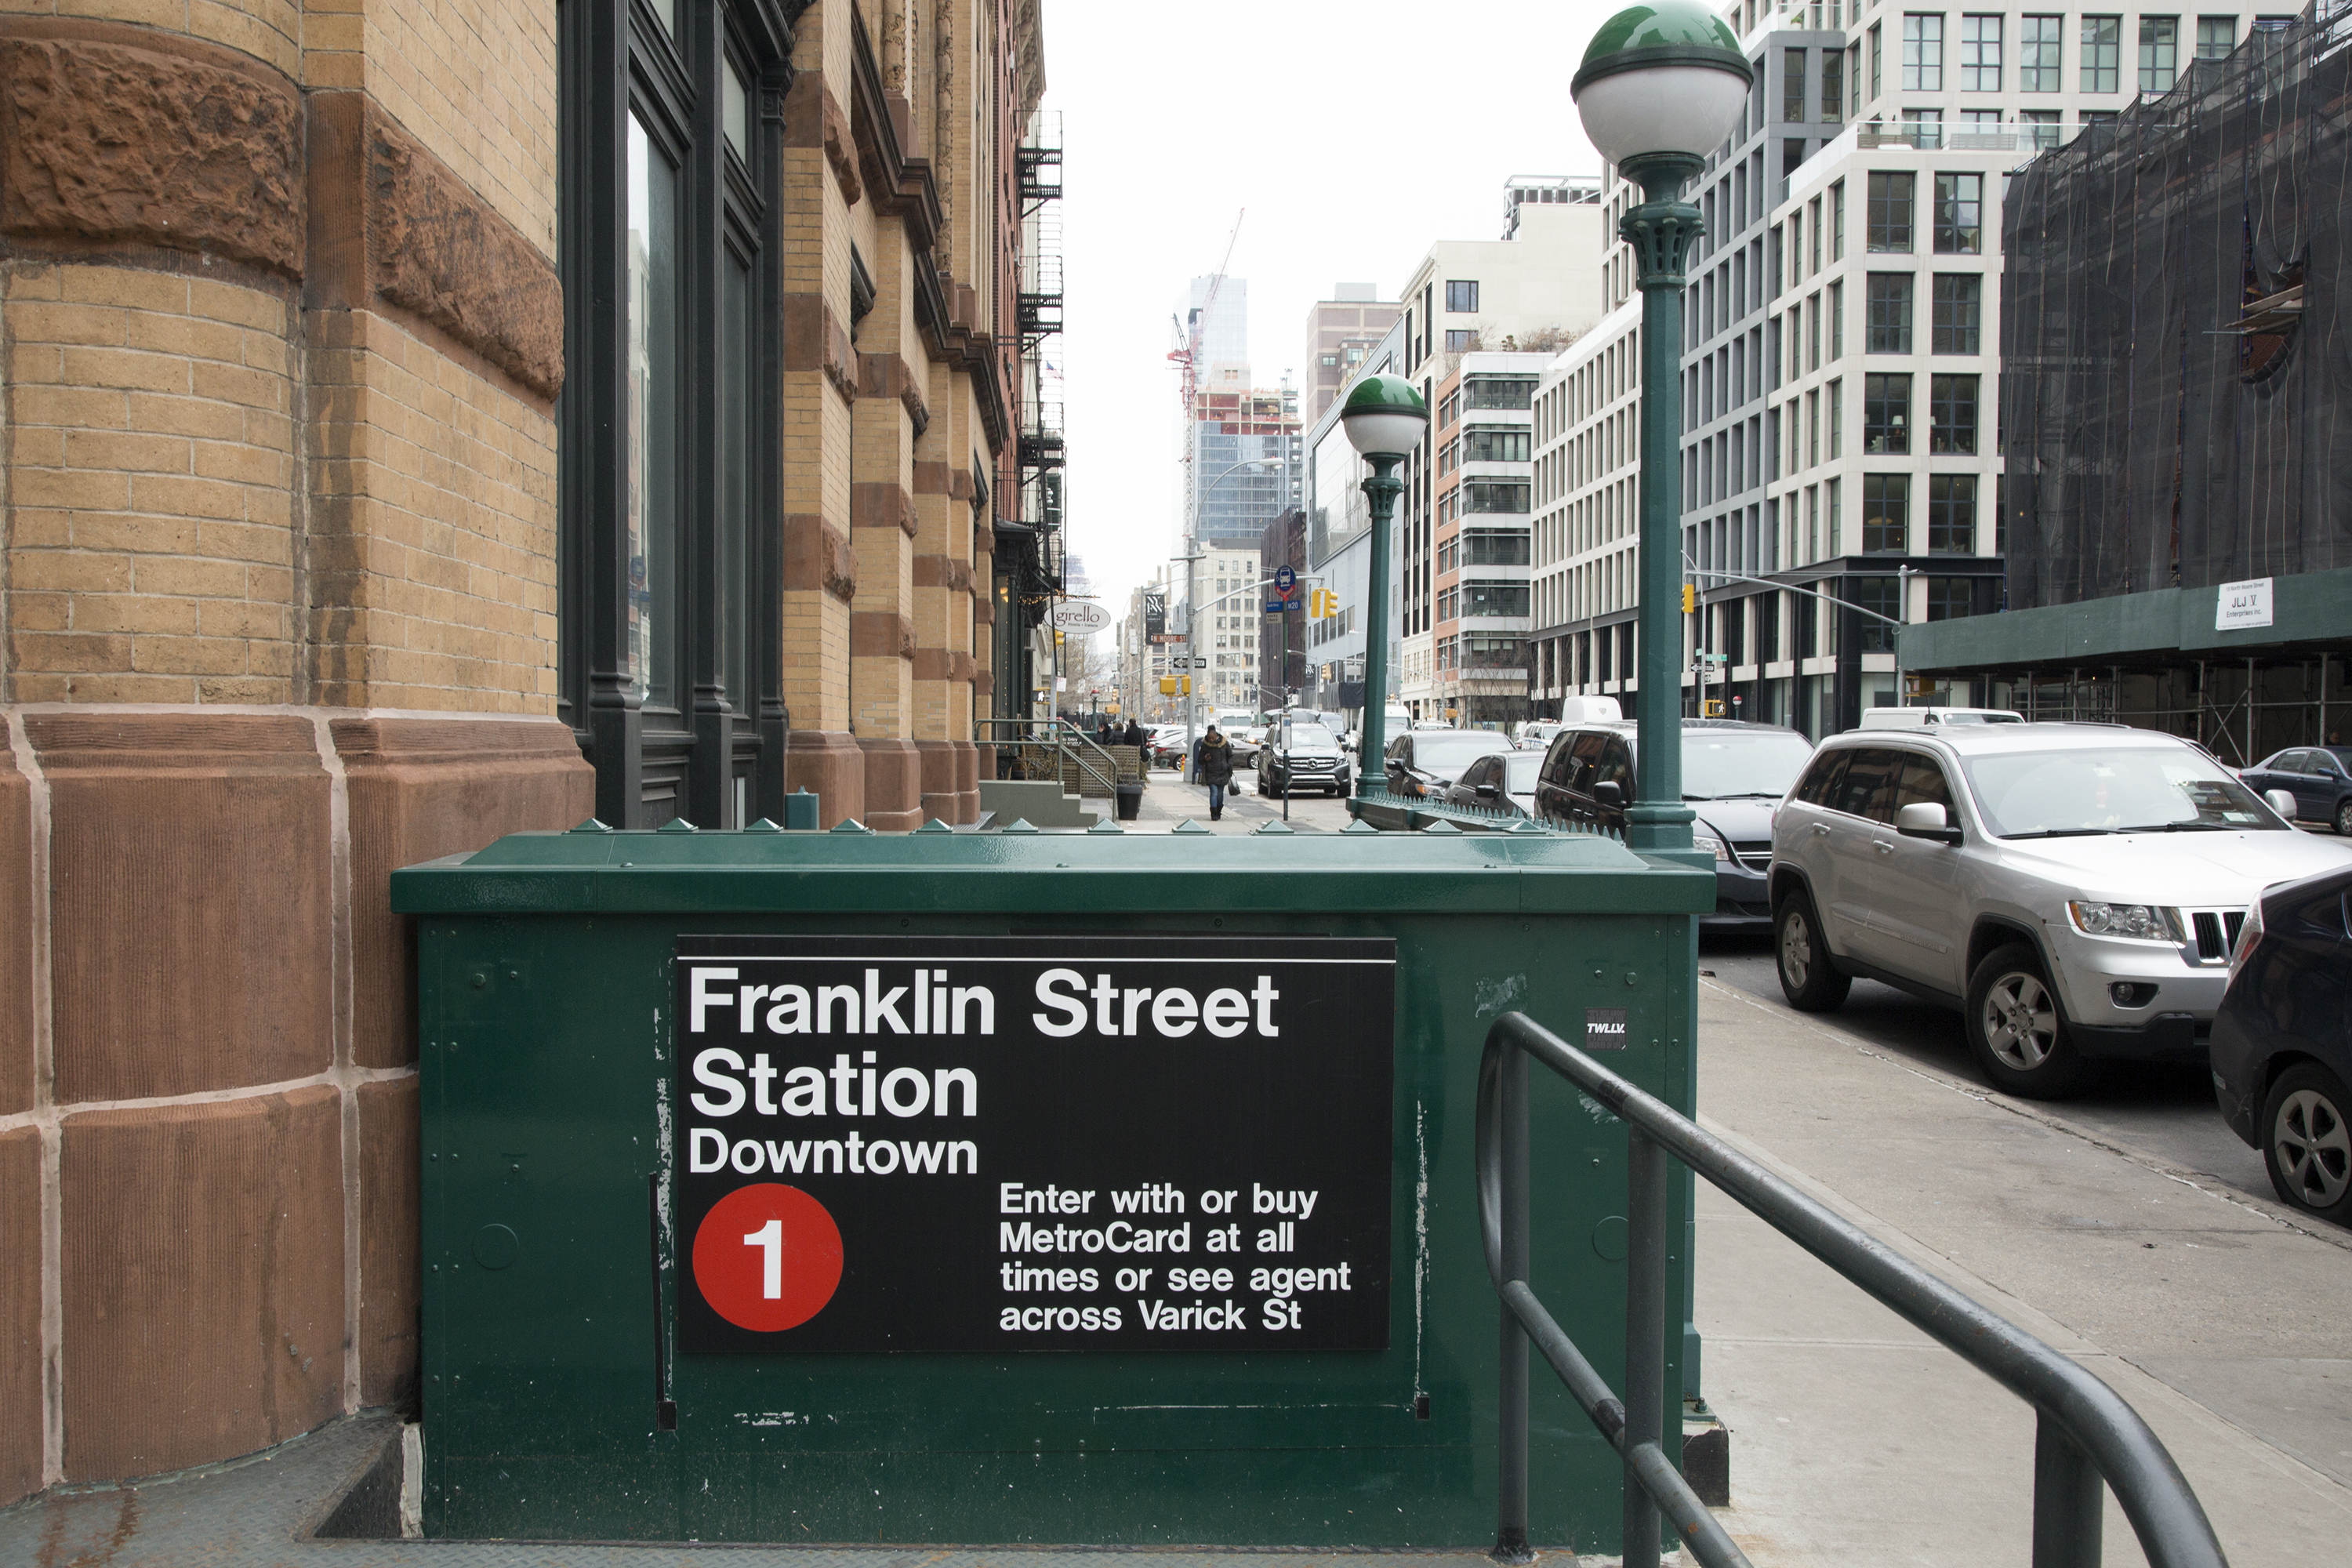 The Franklin Street Station, located at the eastern end of Swift's block, allows for easy access to the rest of the city, should Swift decide to ride the subway.